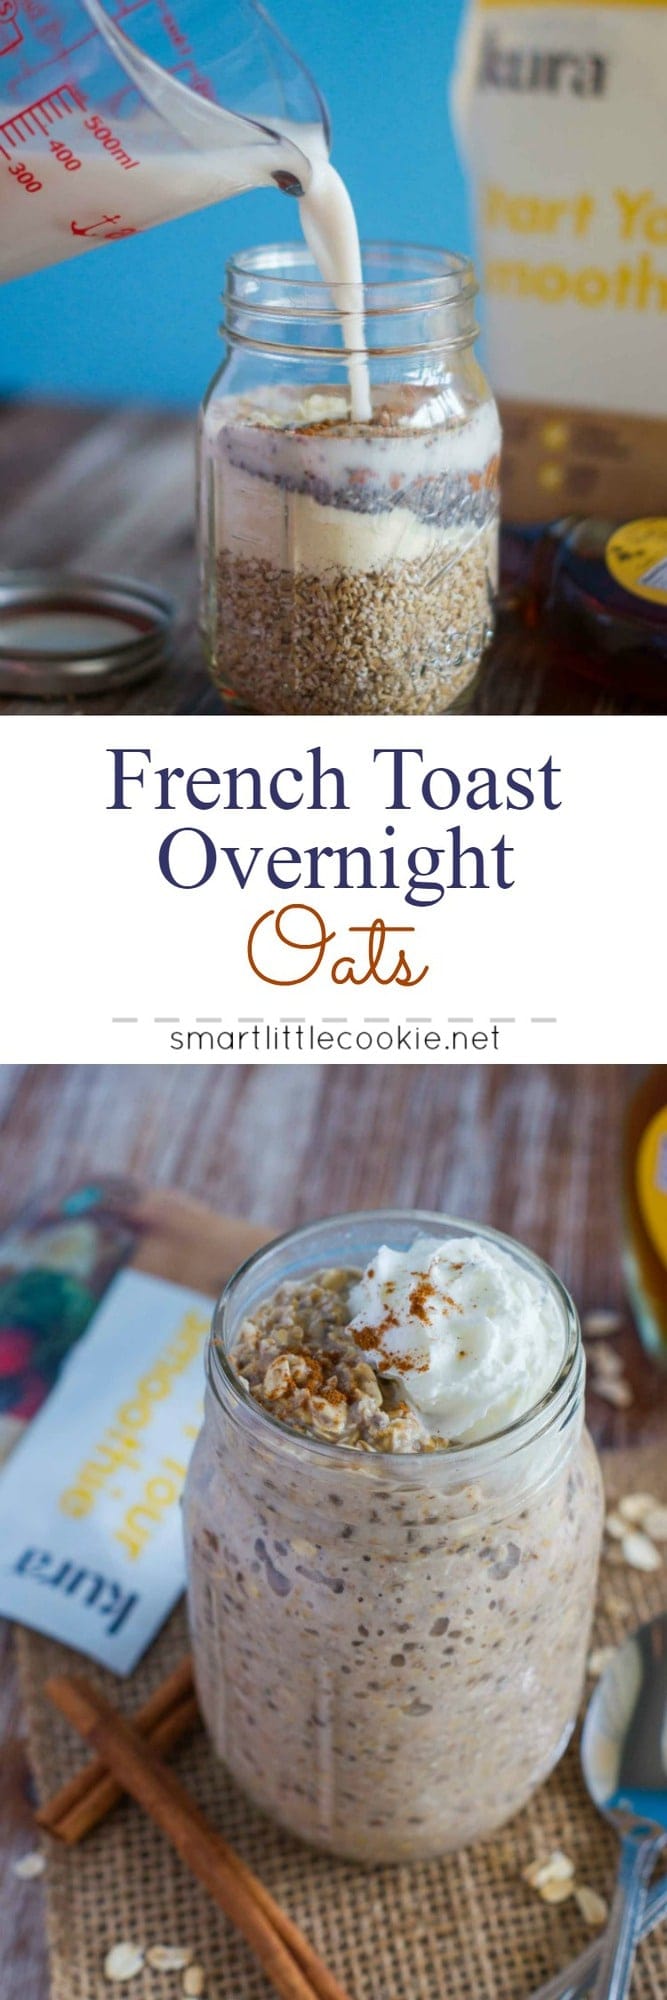 Pinterest graphic. French toast overnight oats with text overlay.